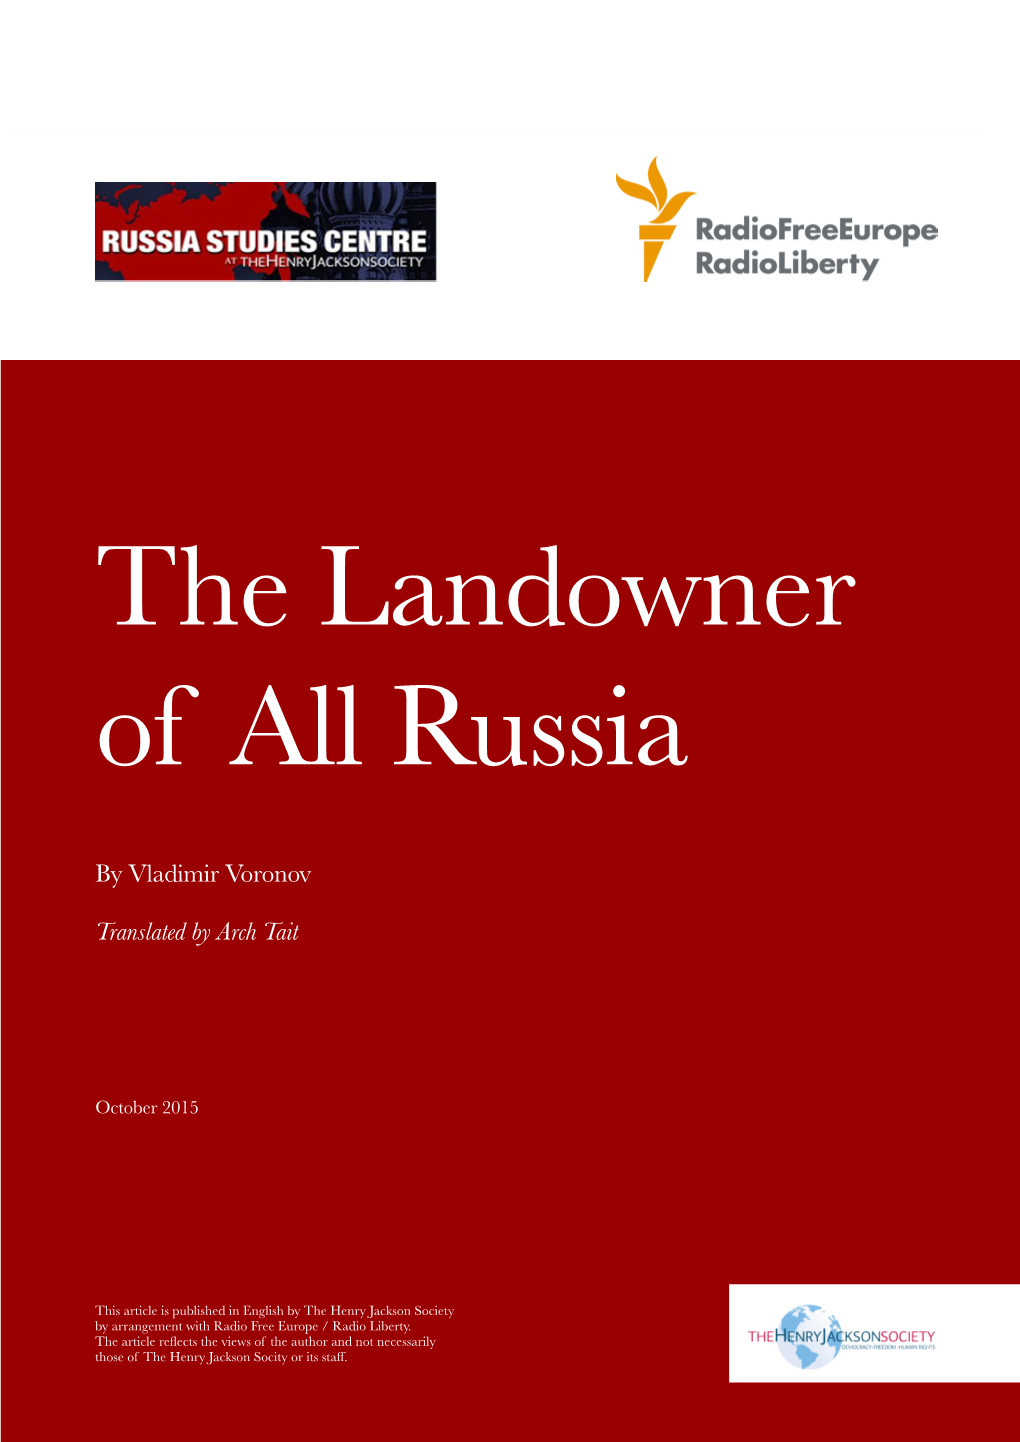 The Landowner of All Russia